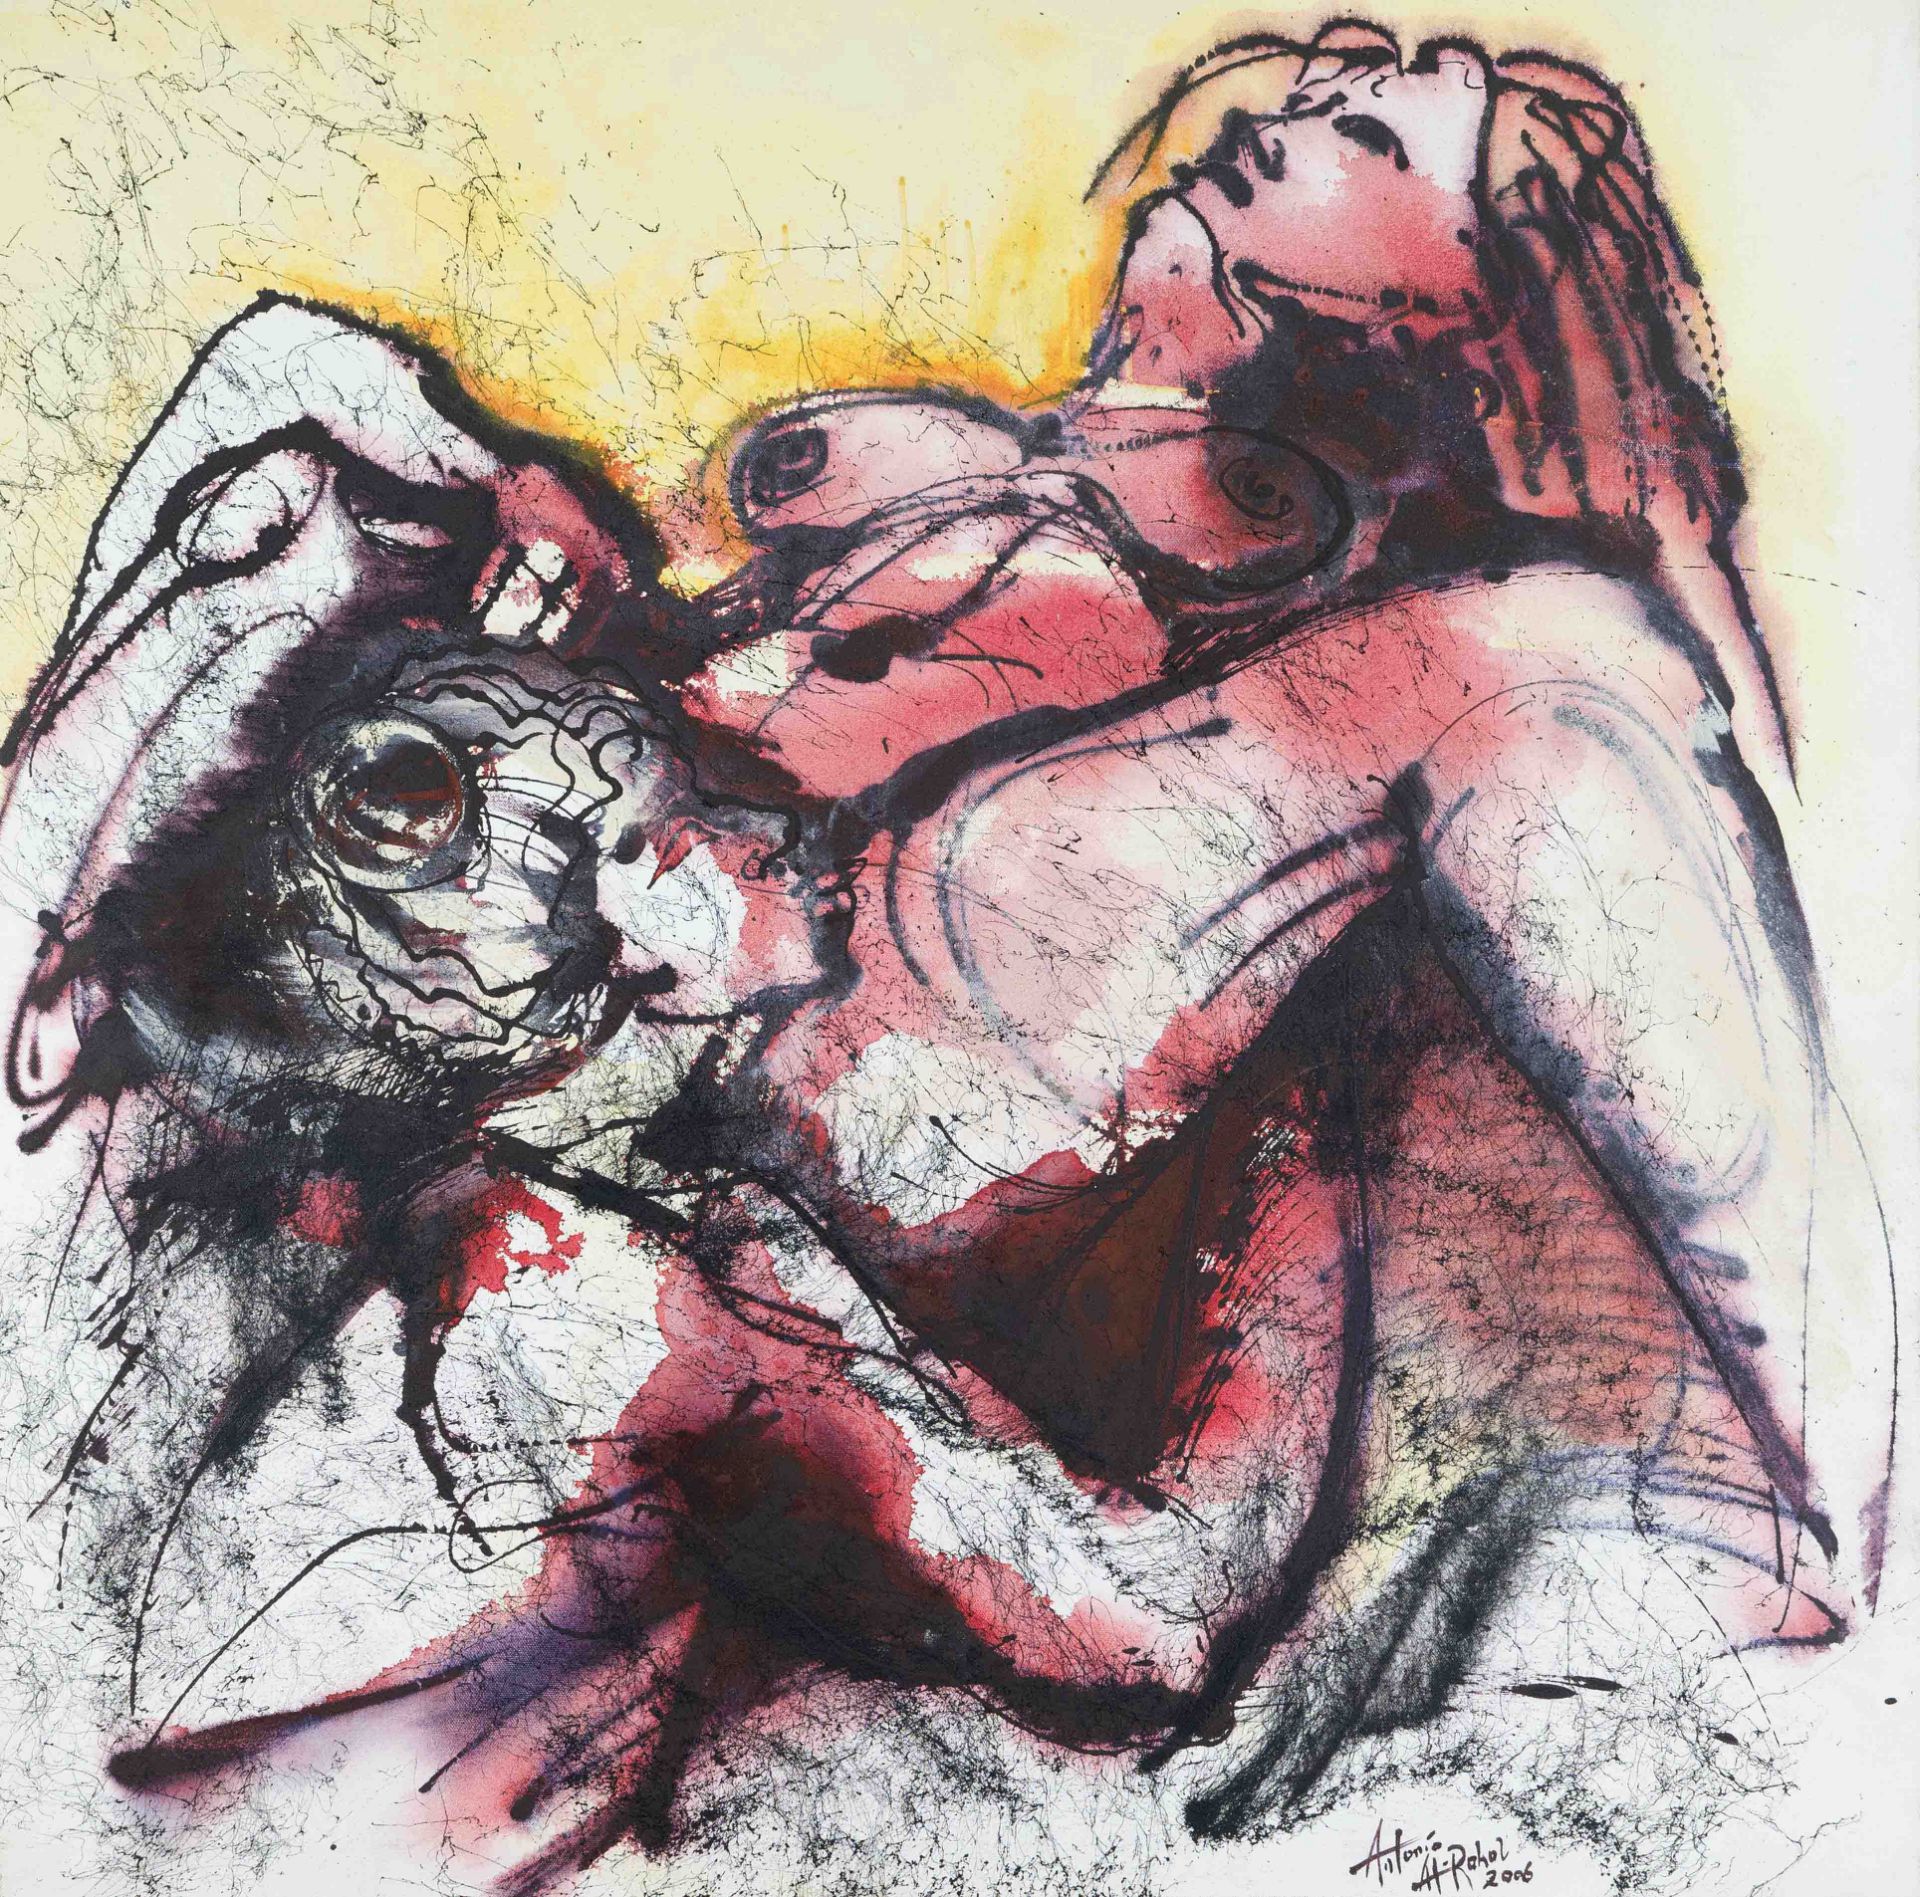 Antonio Al-Rahal, contemporary artist, lesbian lovers, mixed media on canvas, signed and dated lower